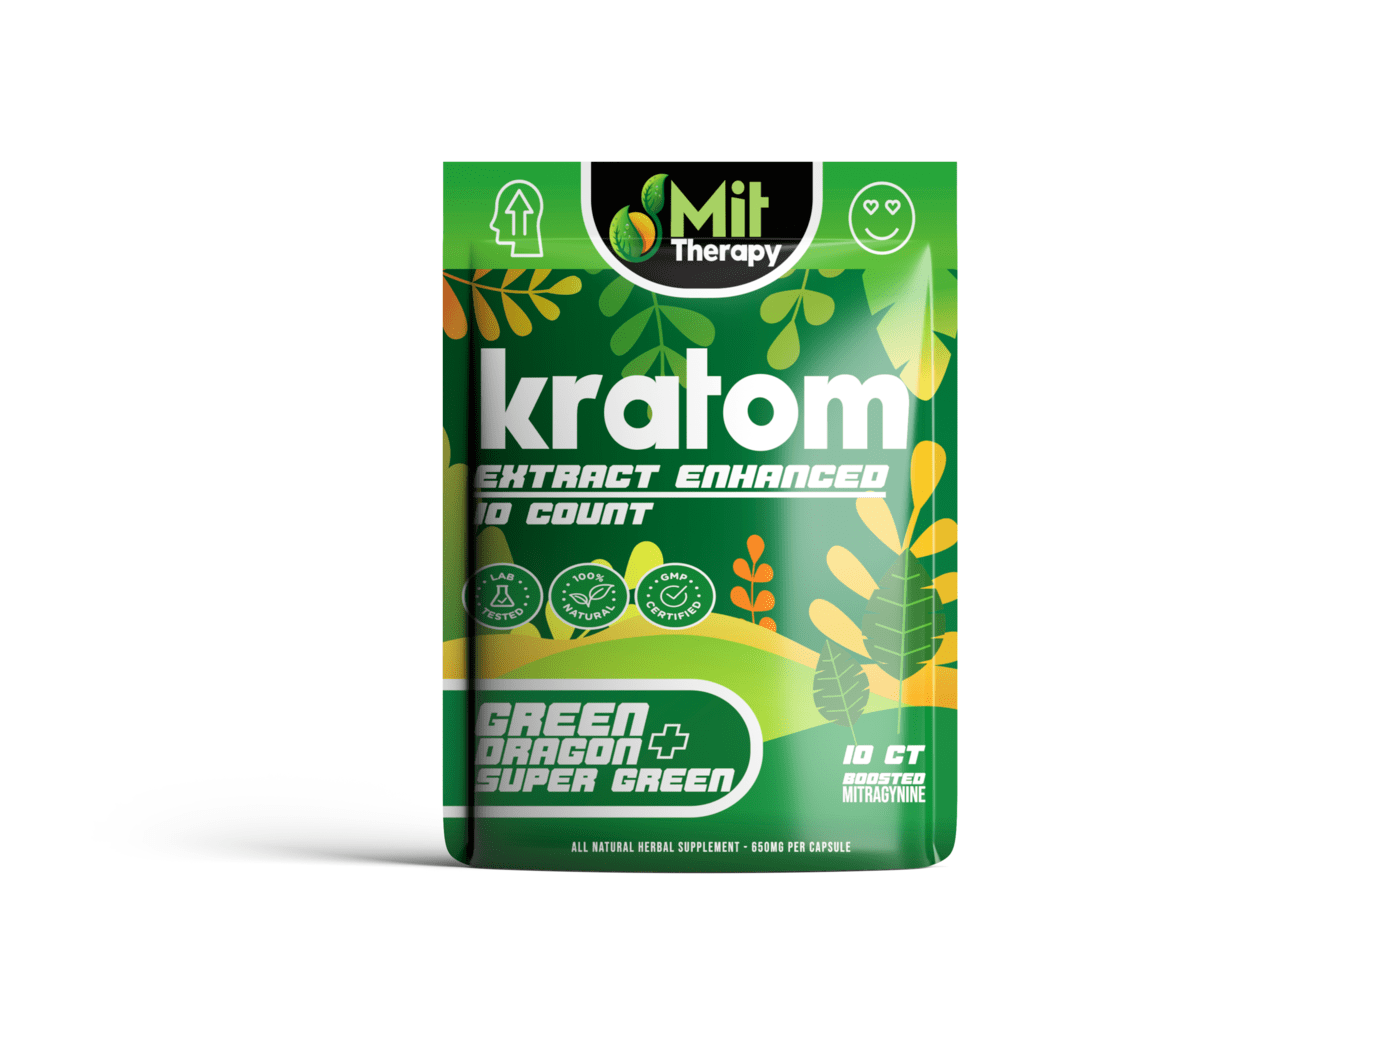 MIT Therapy Green Dragon + Super Green*-10ct x 1 Pouches (10 Total Capsules)